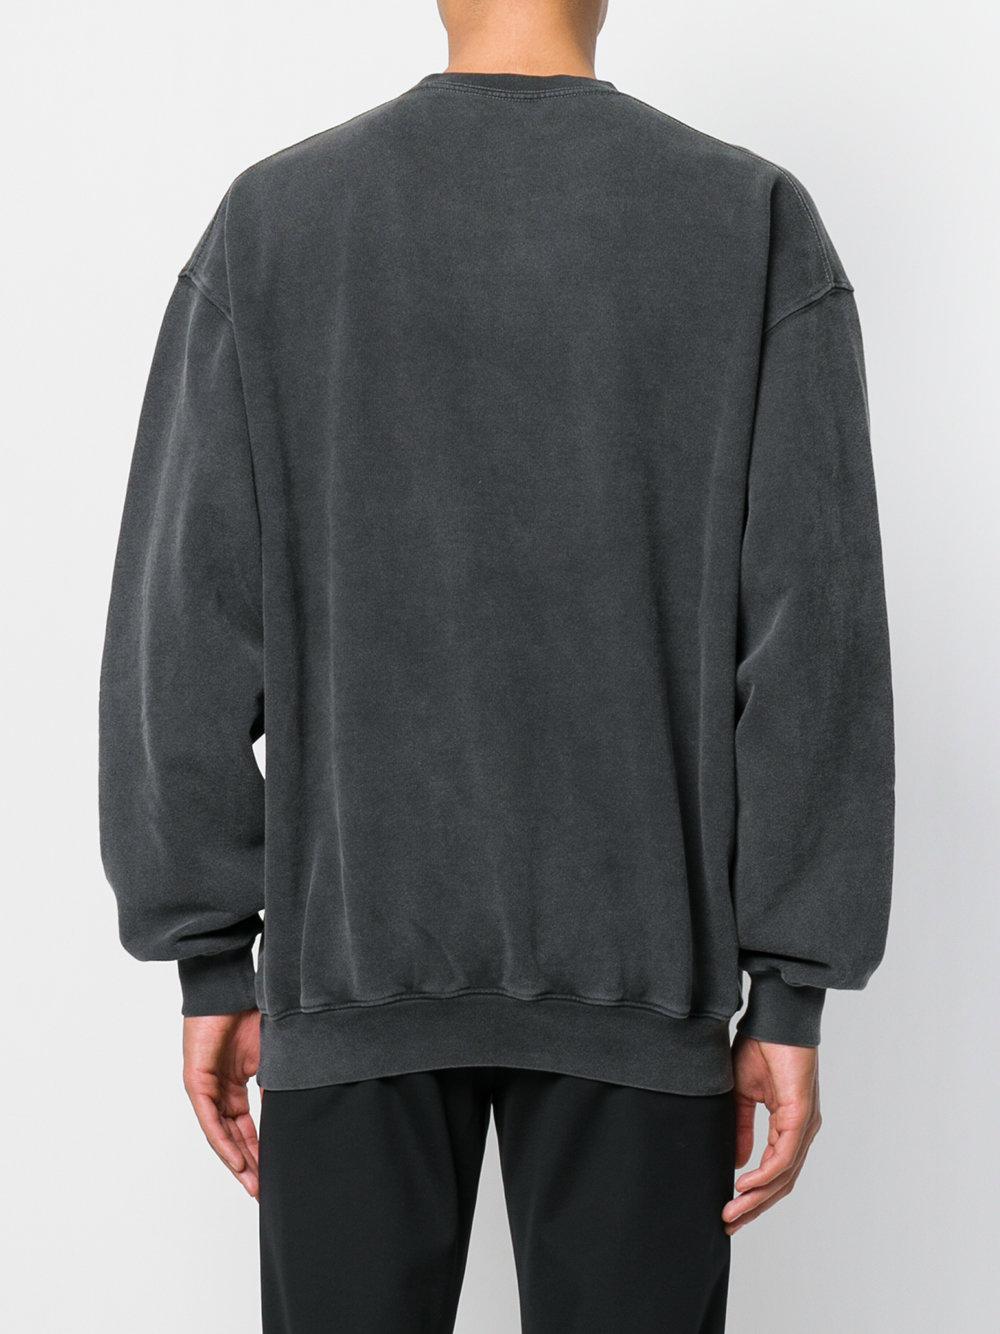 Balenciaga Cotton Sinners Oversized Sweater in Black for Men - Lyst